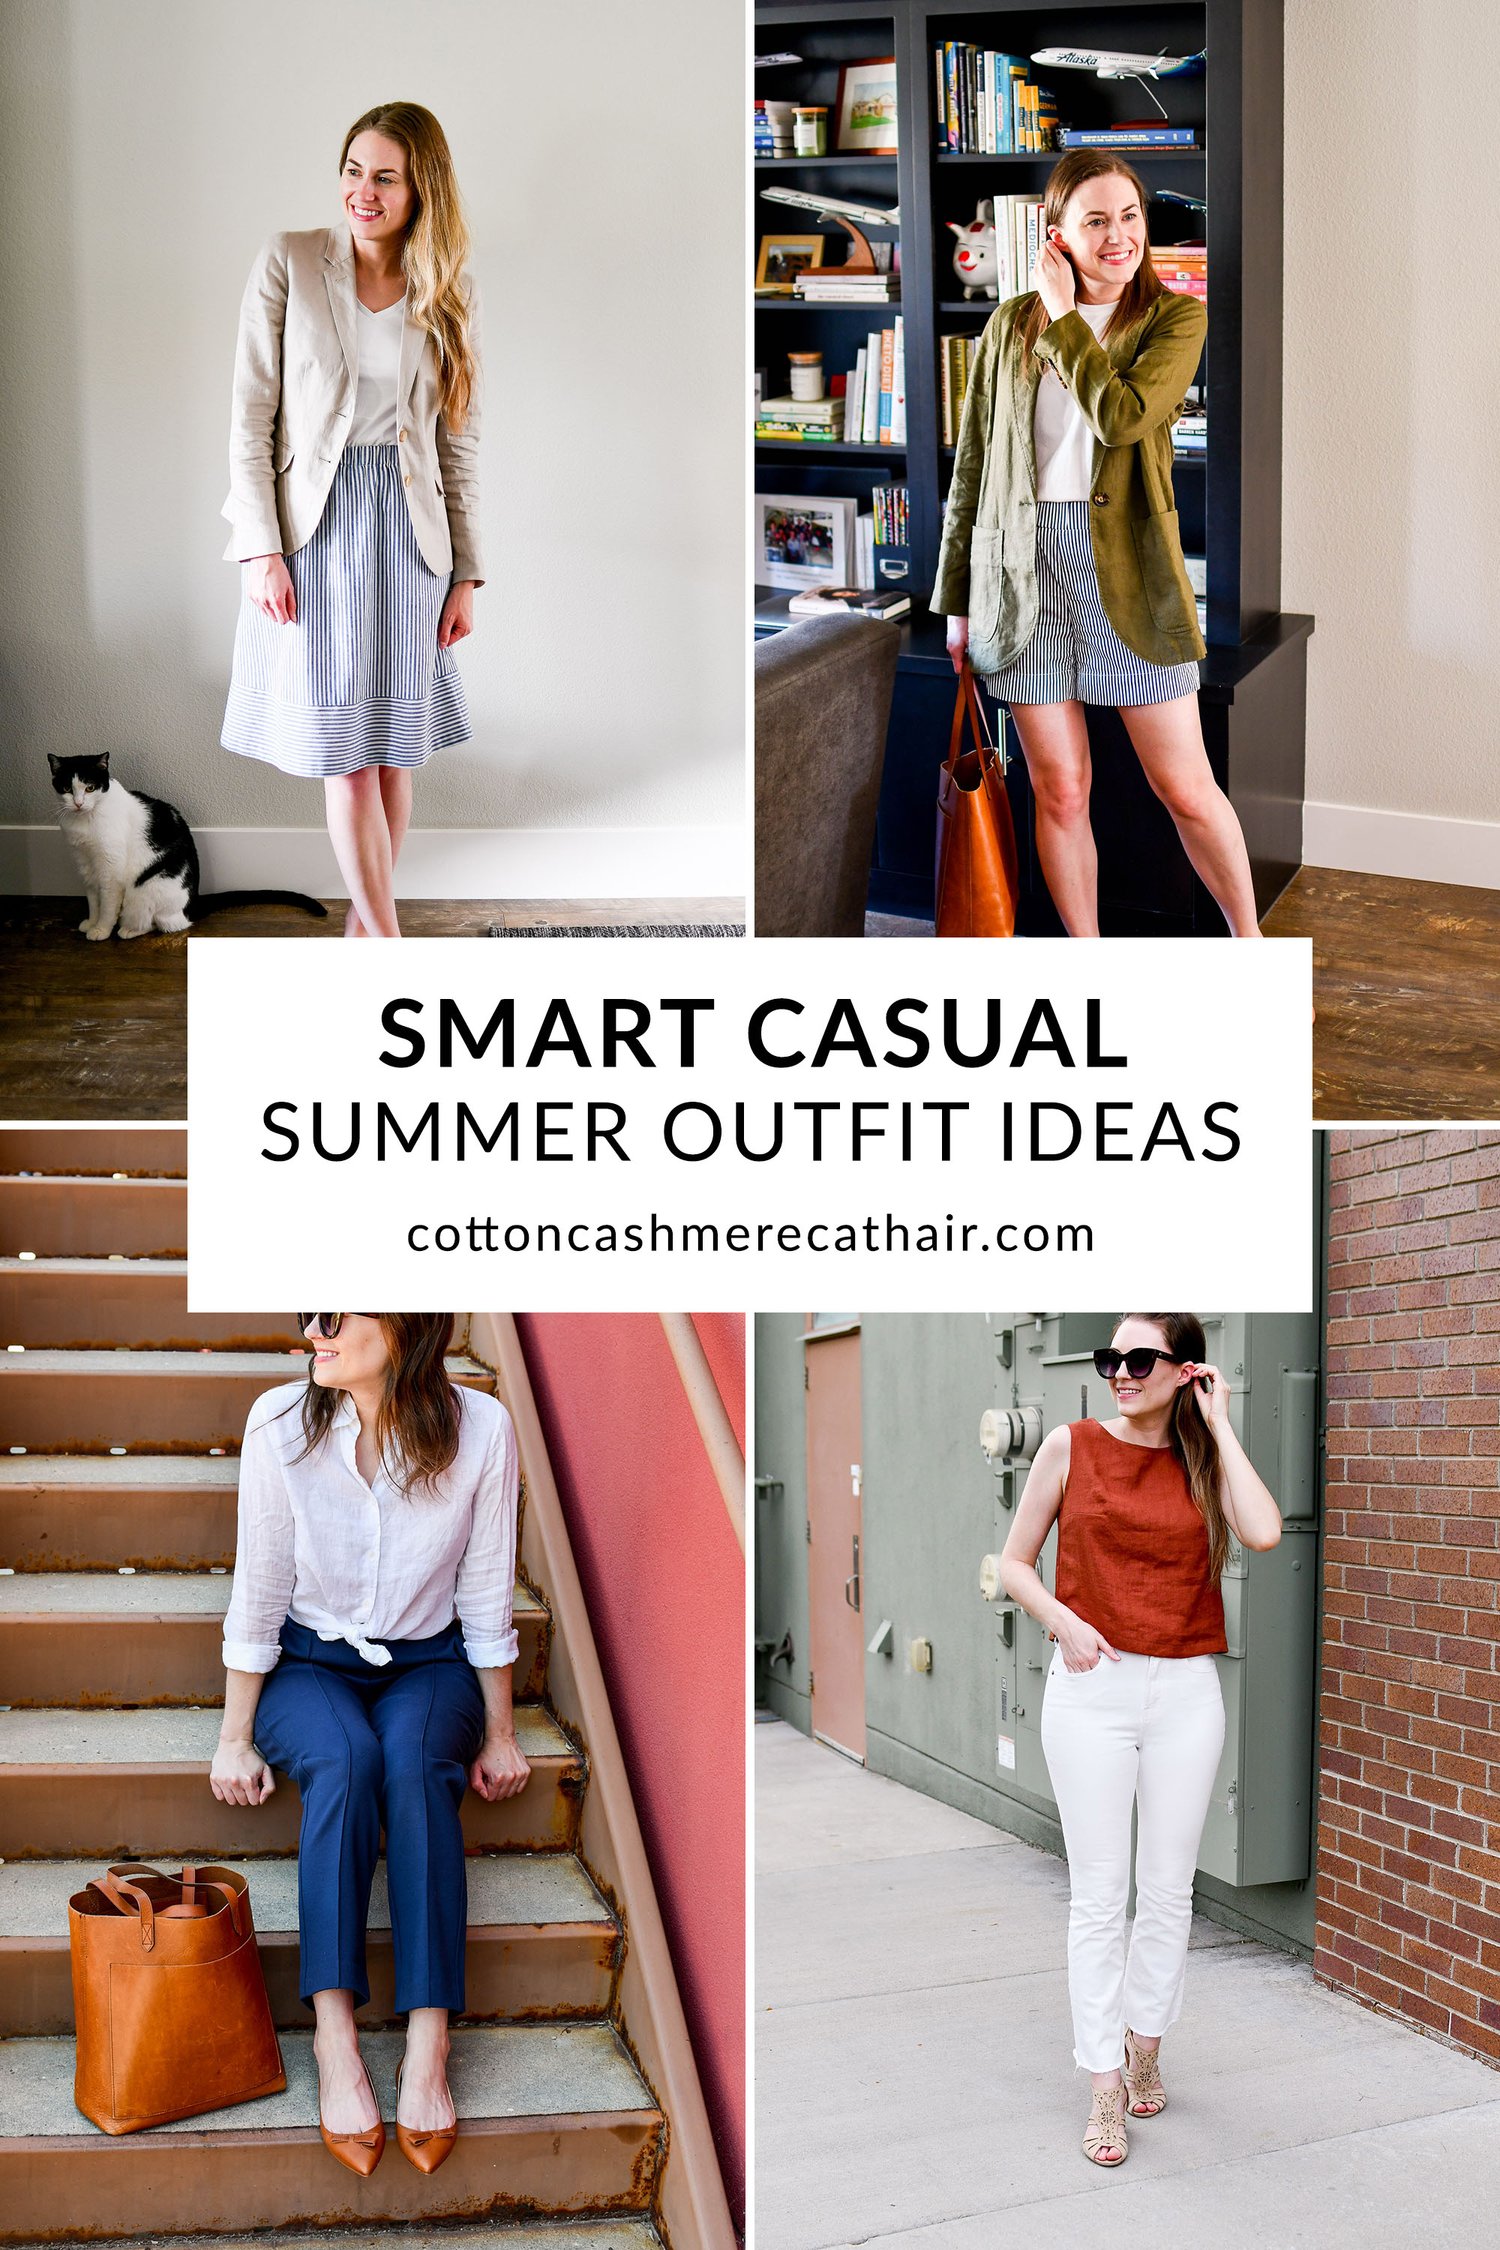 4 Comfy Casual Outfits You Need This Summer – Fashion